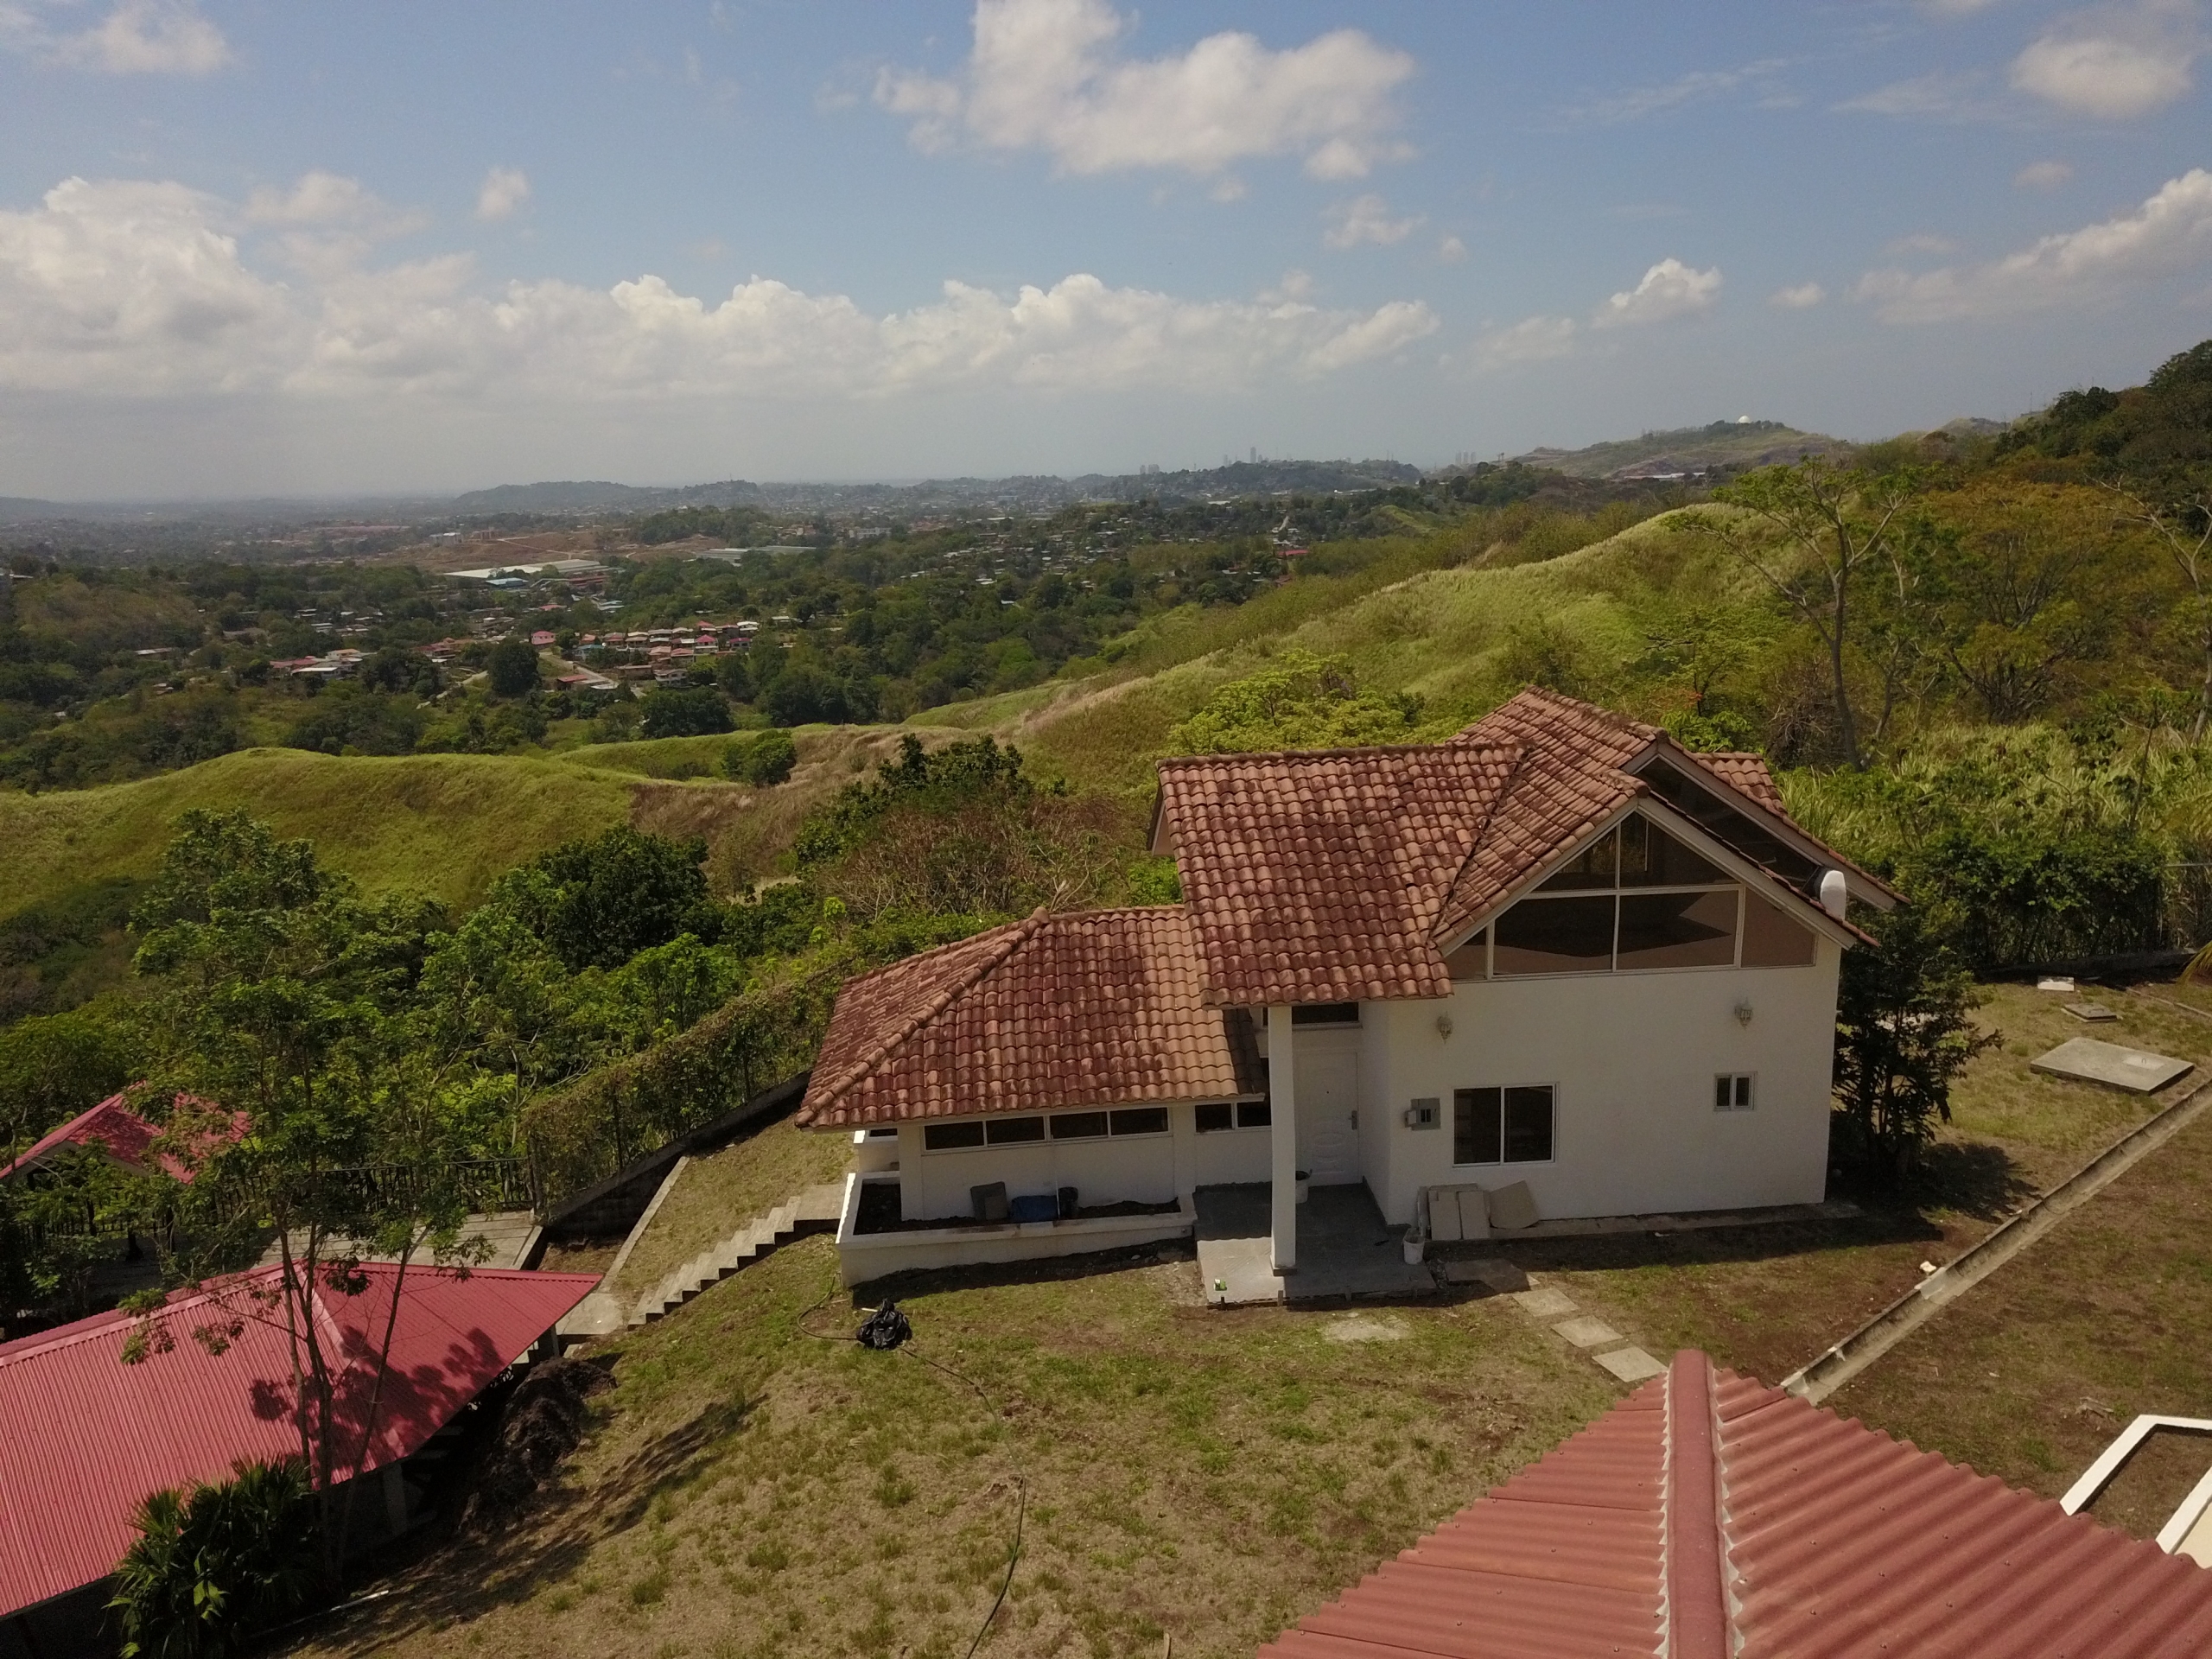 Home for sale in Las Cumbres of Panama City Panama